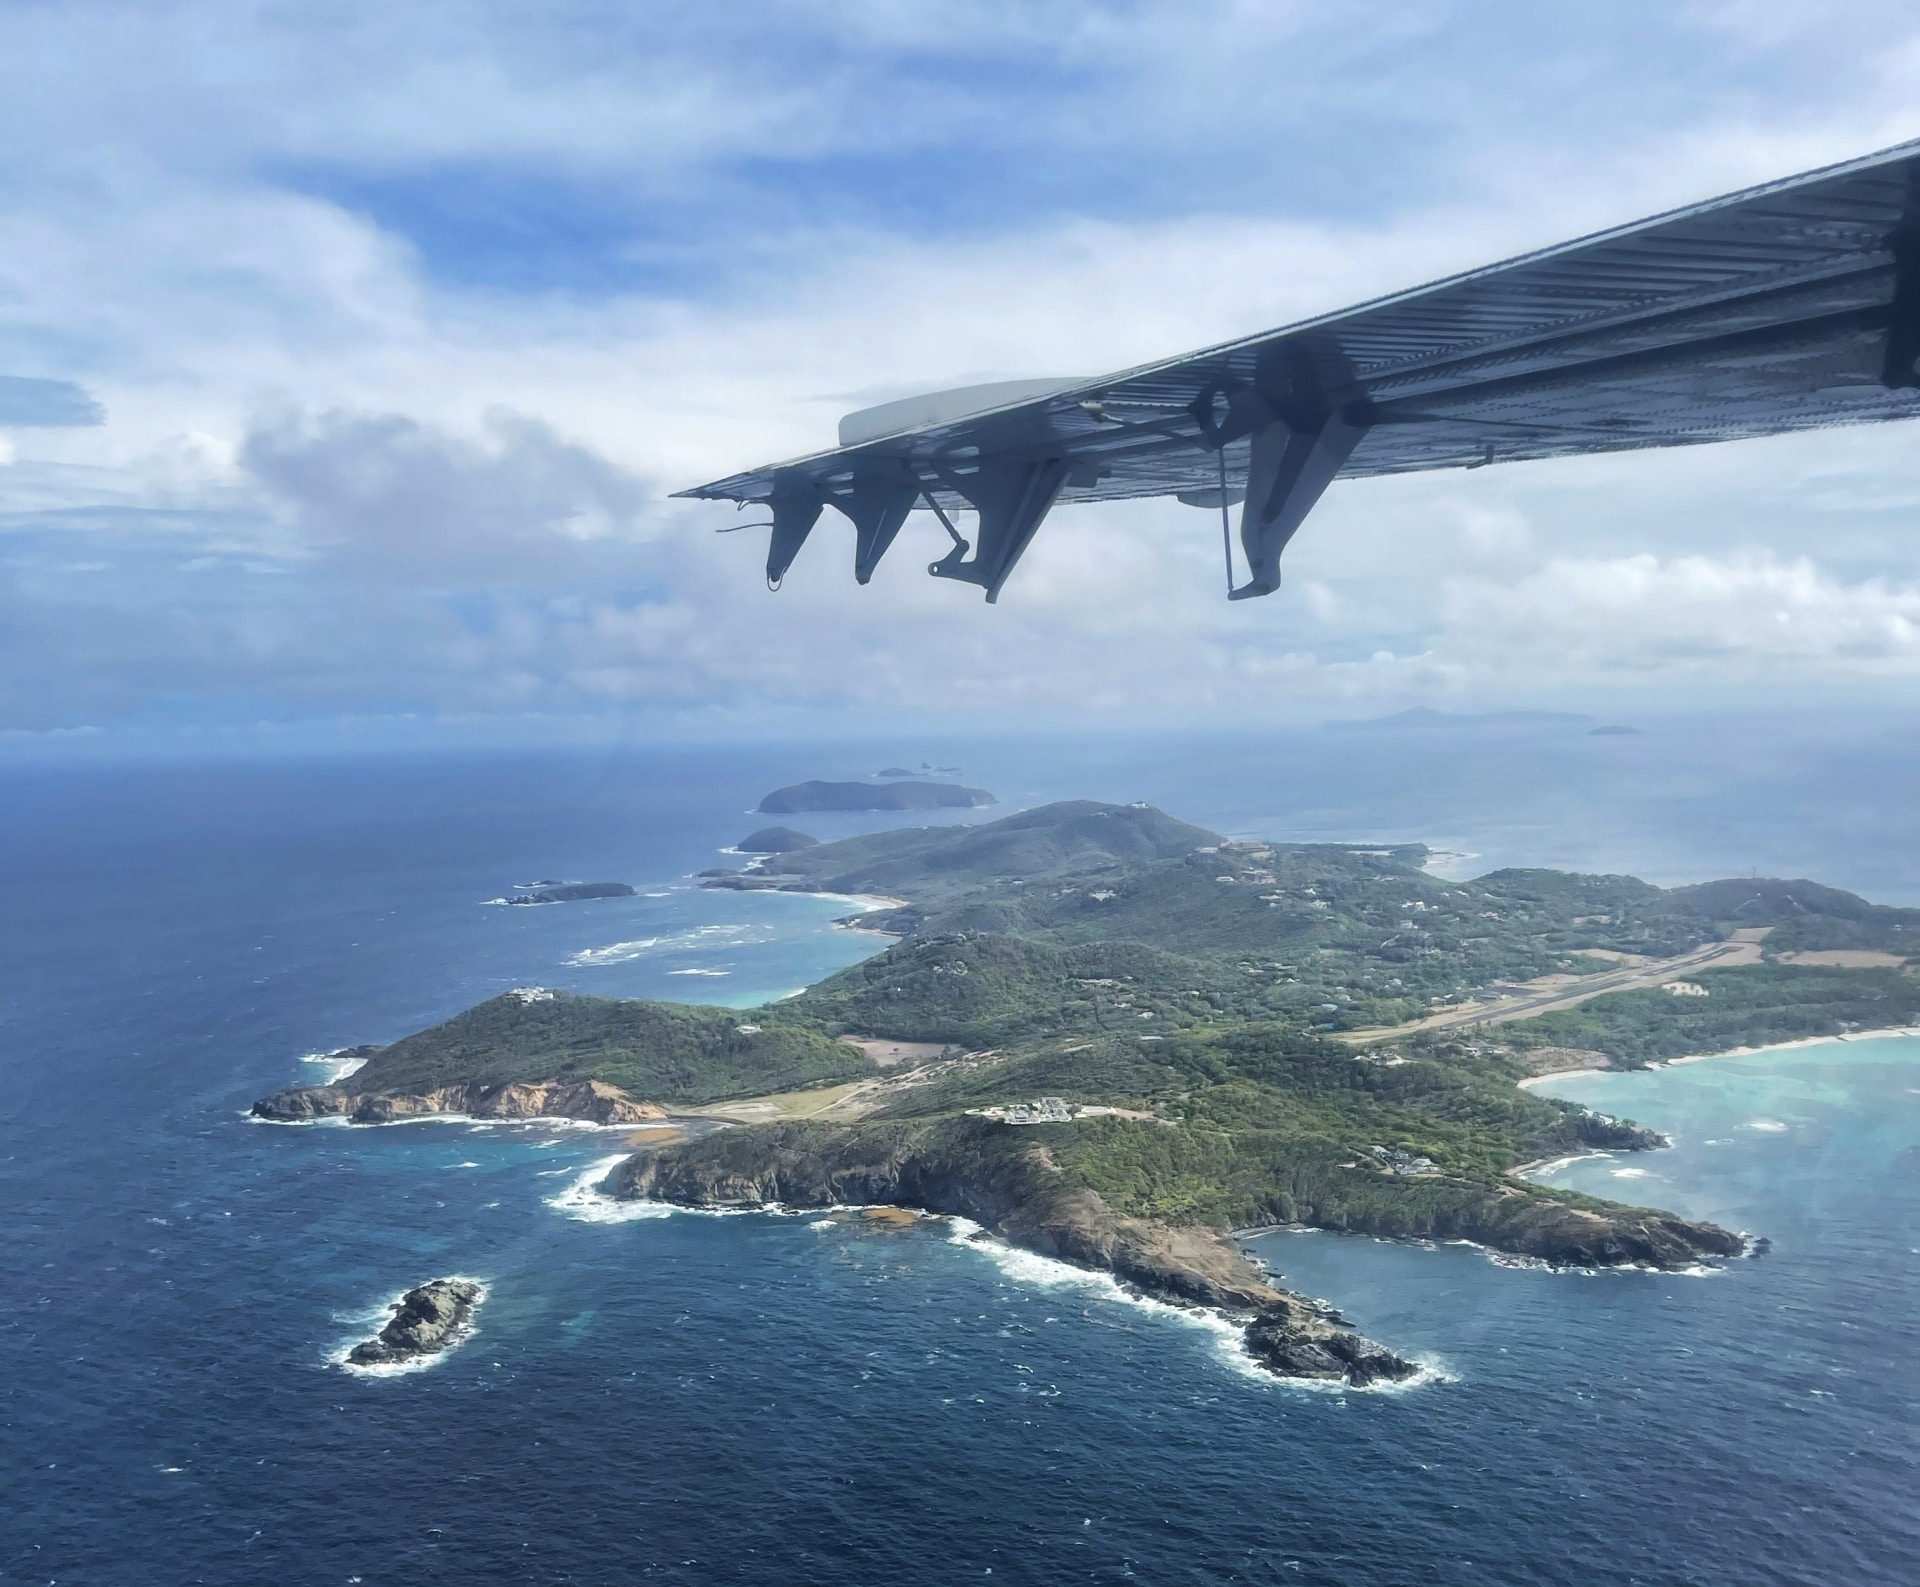 LeakTronics Travels to Mustique Island in the Caribbean